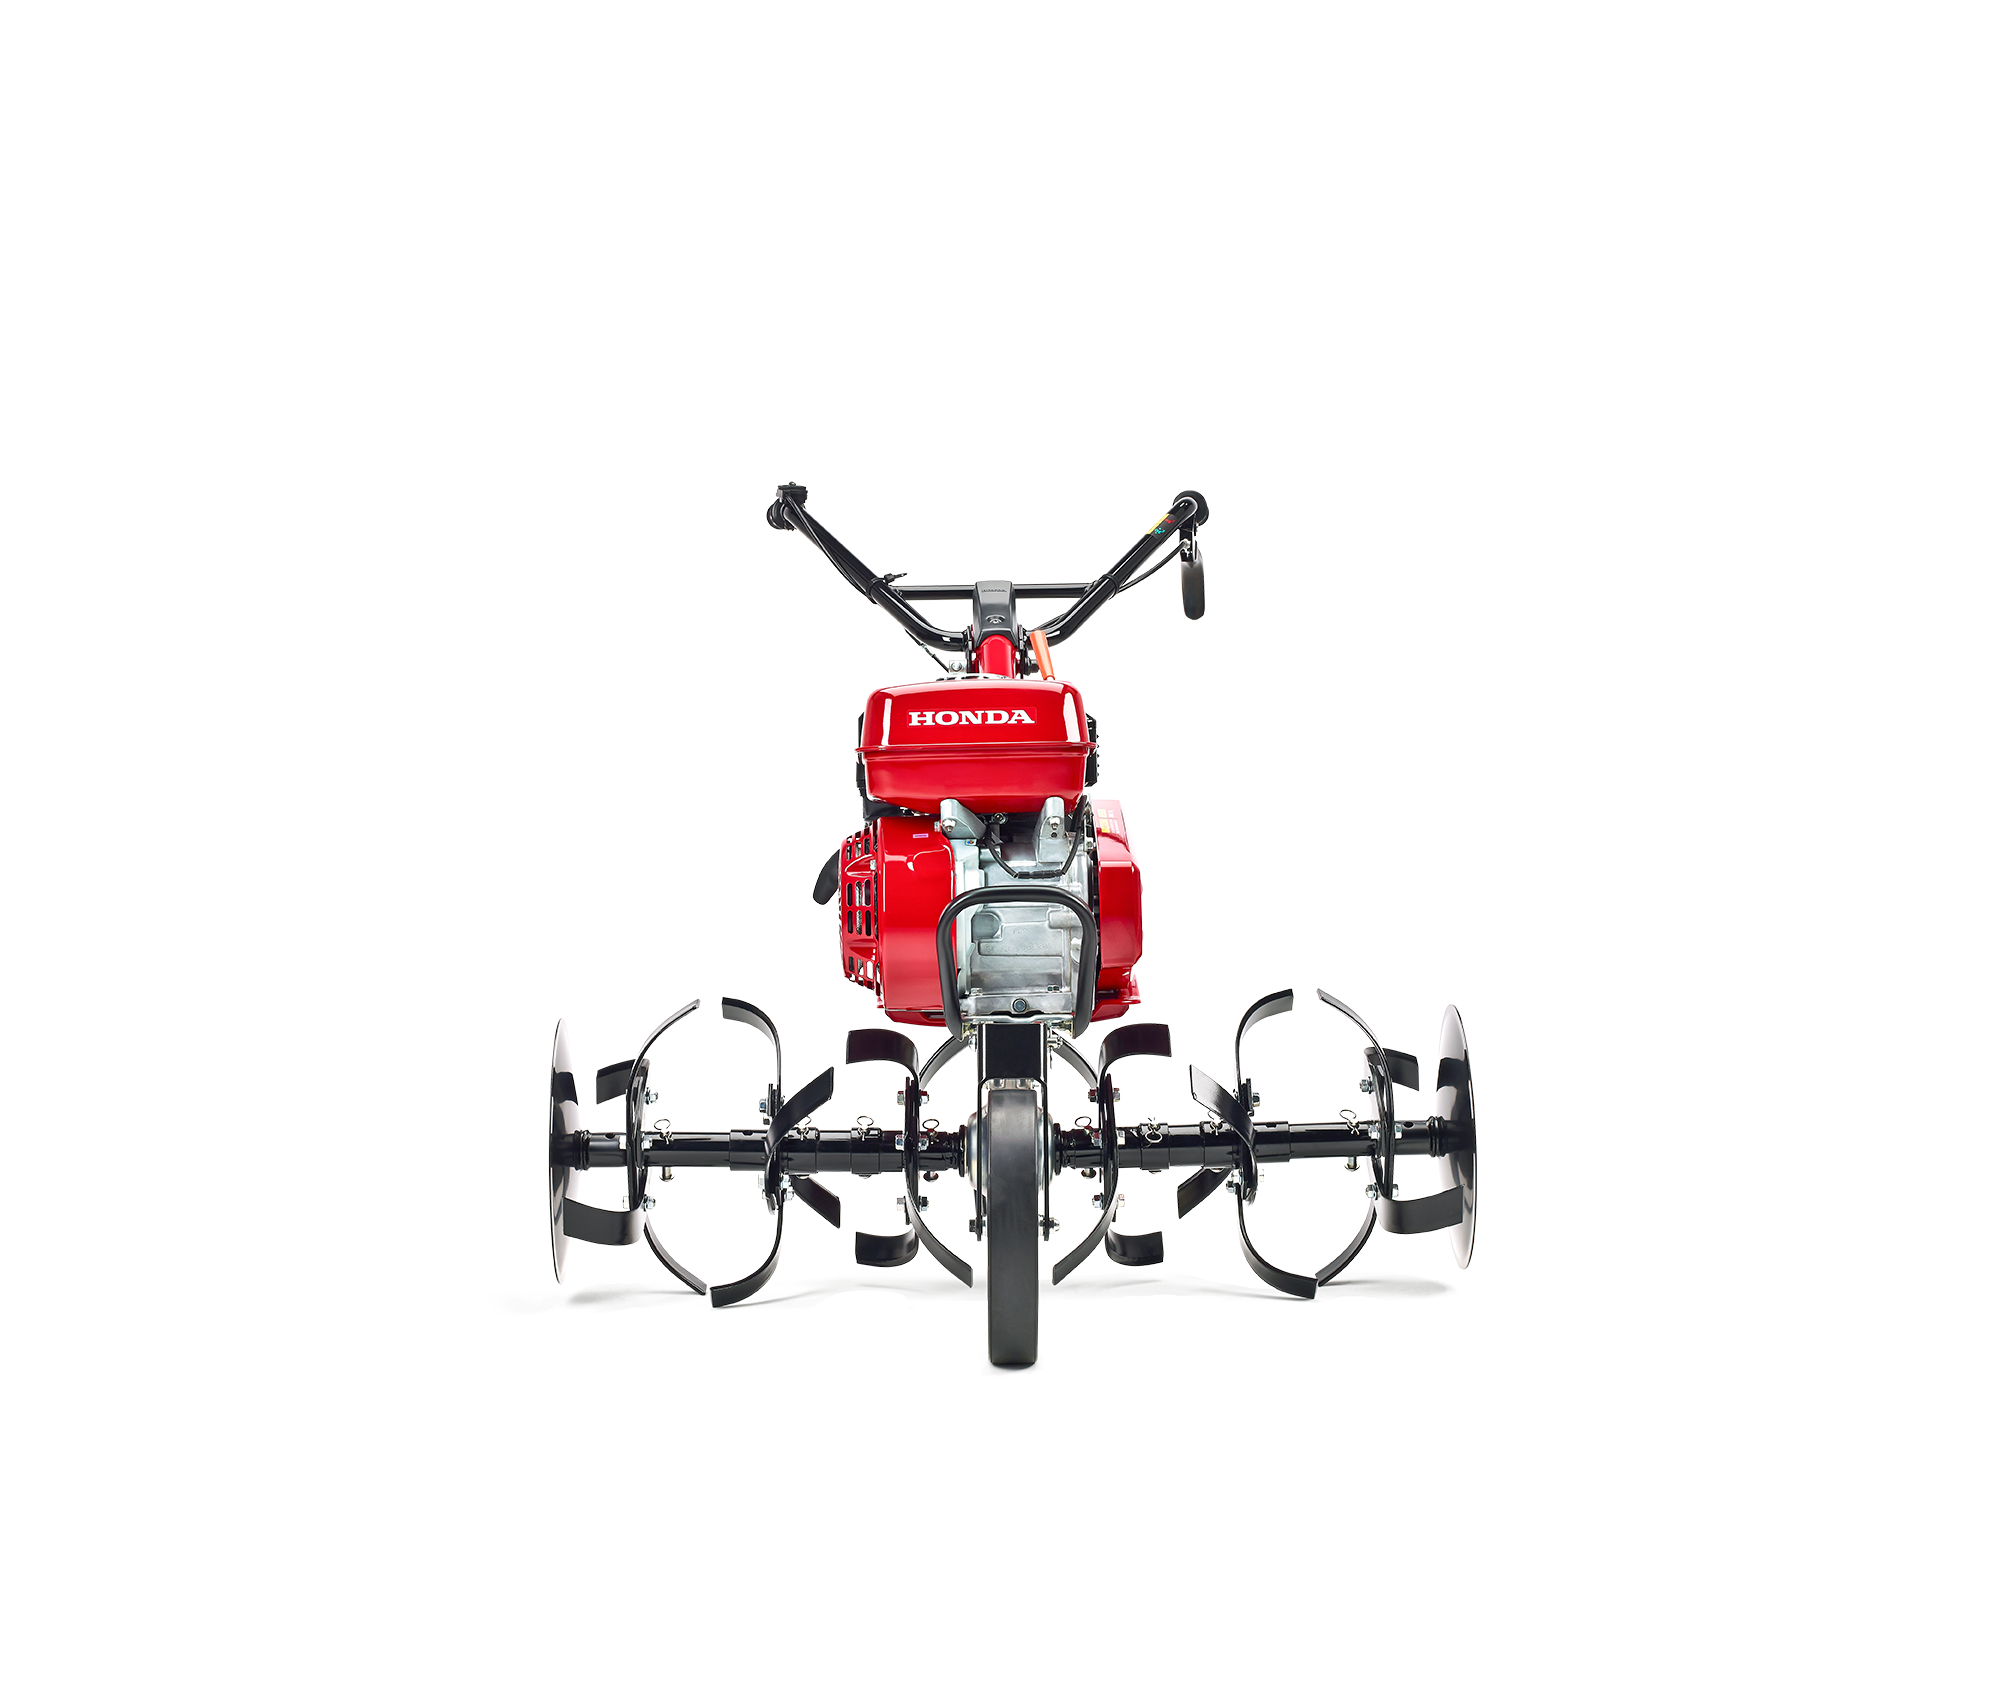 Image of the Mid-Tine 36" Multi-Drive tiller